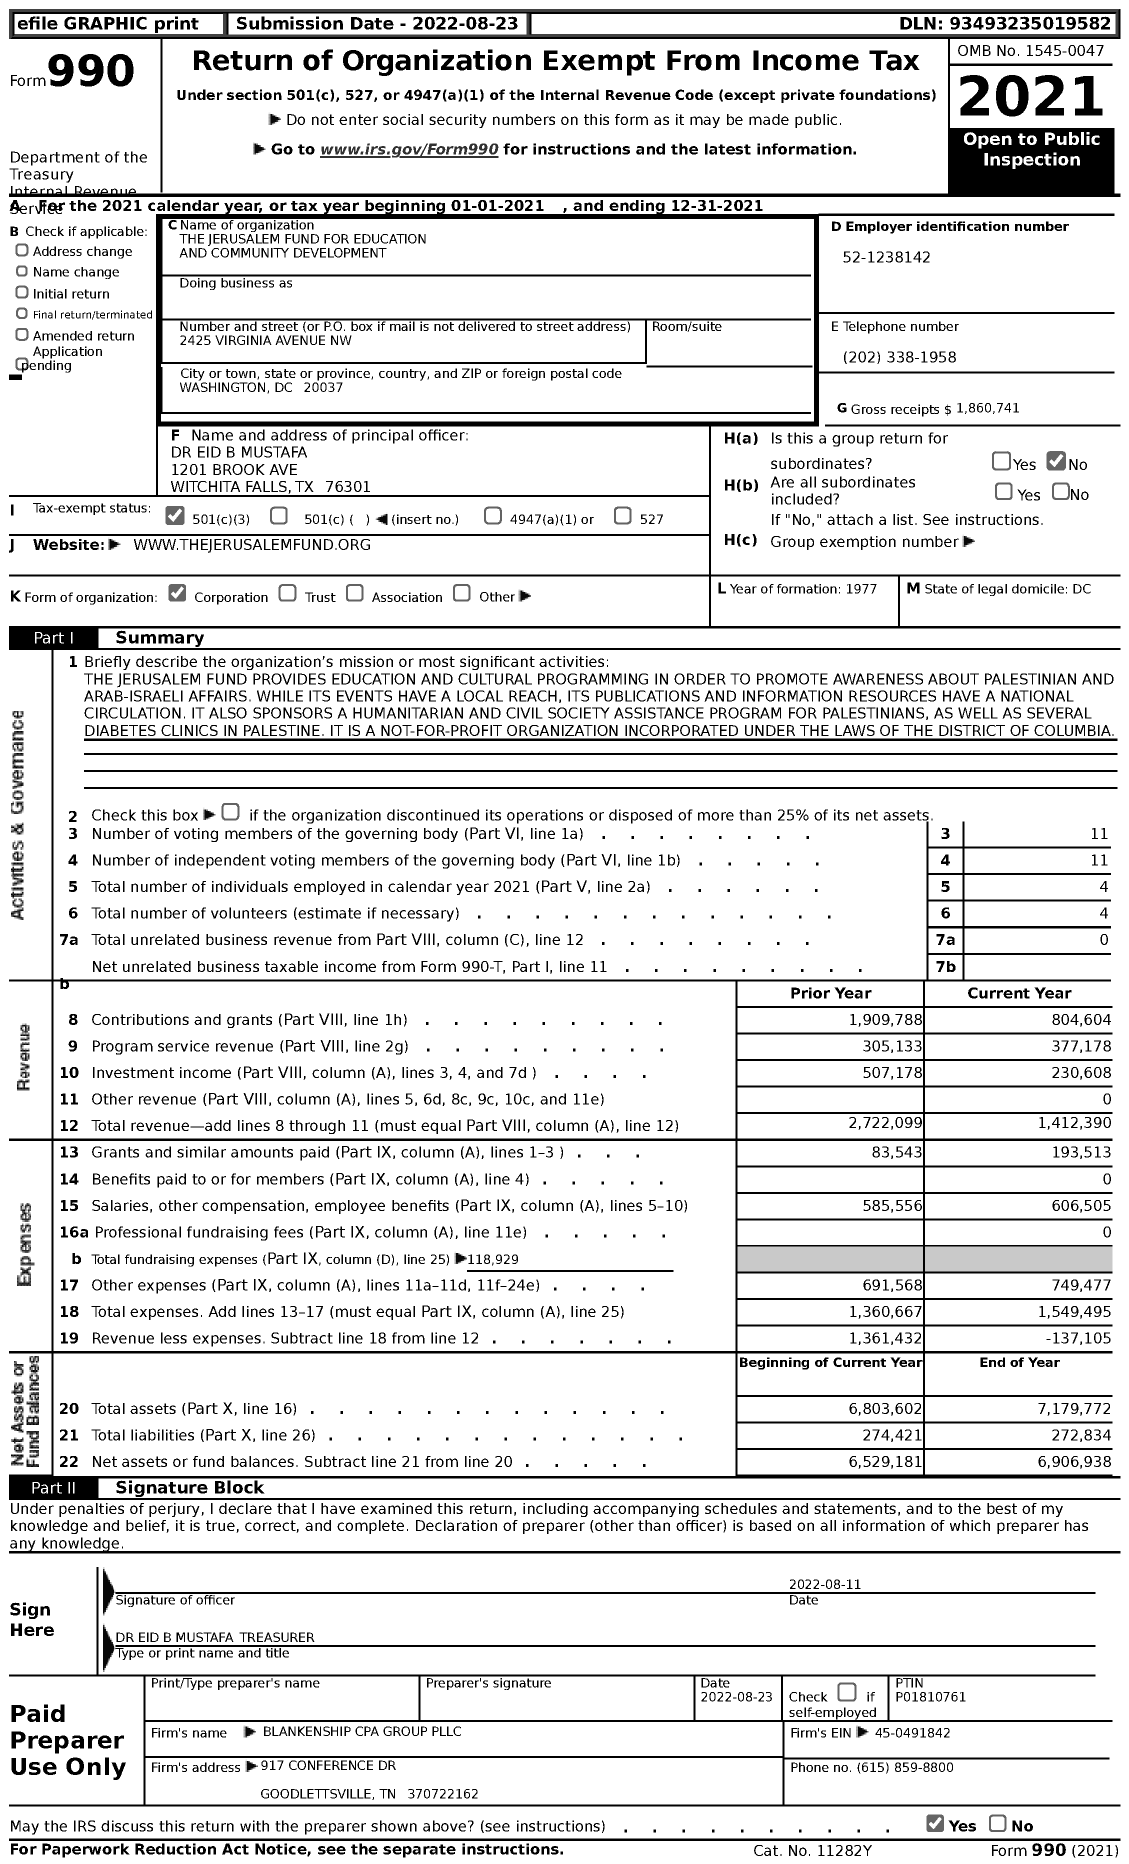 Image of first page of 2021 Form 990 for The Jerusalem Fund for Education and Community Development